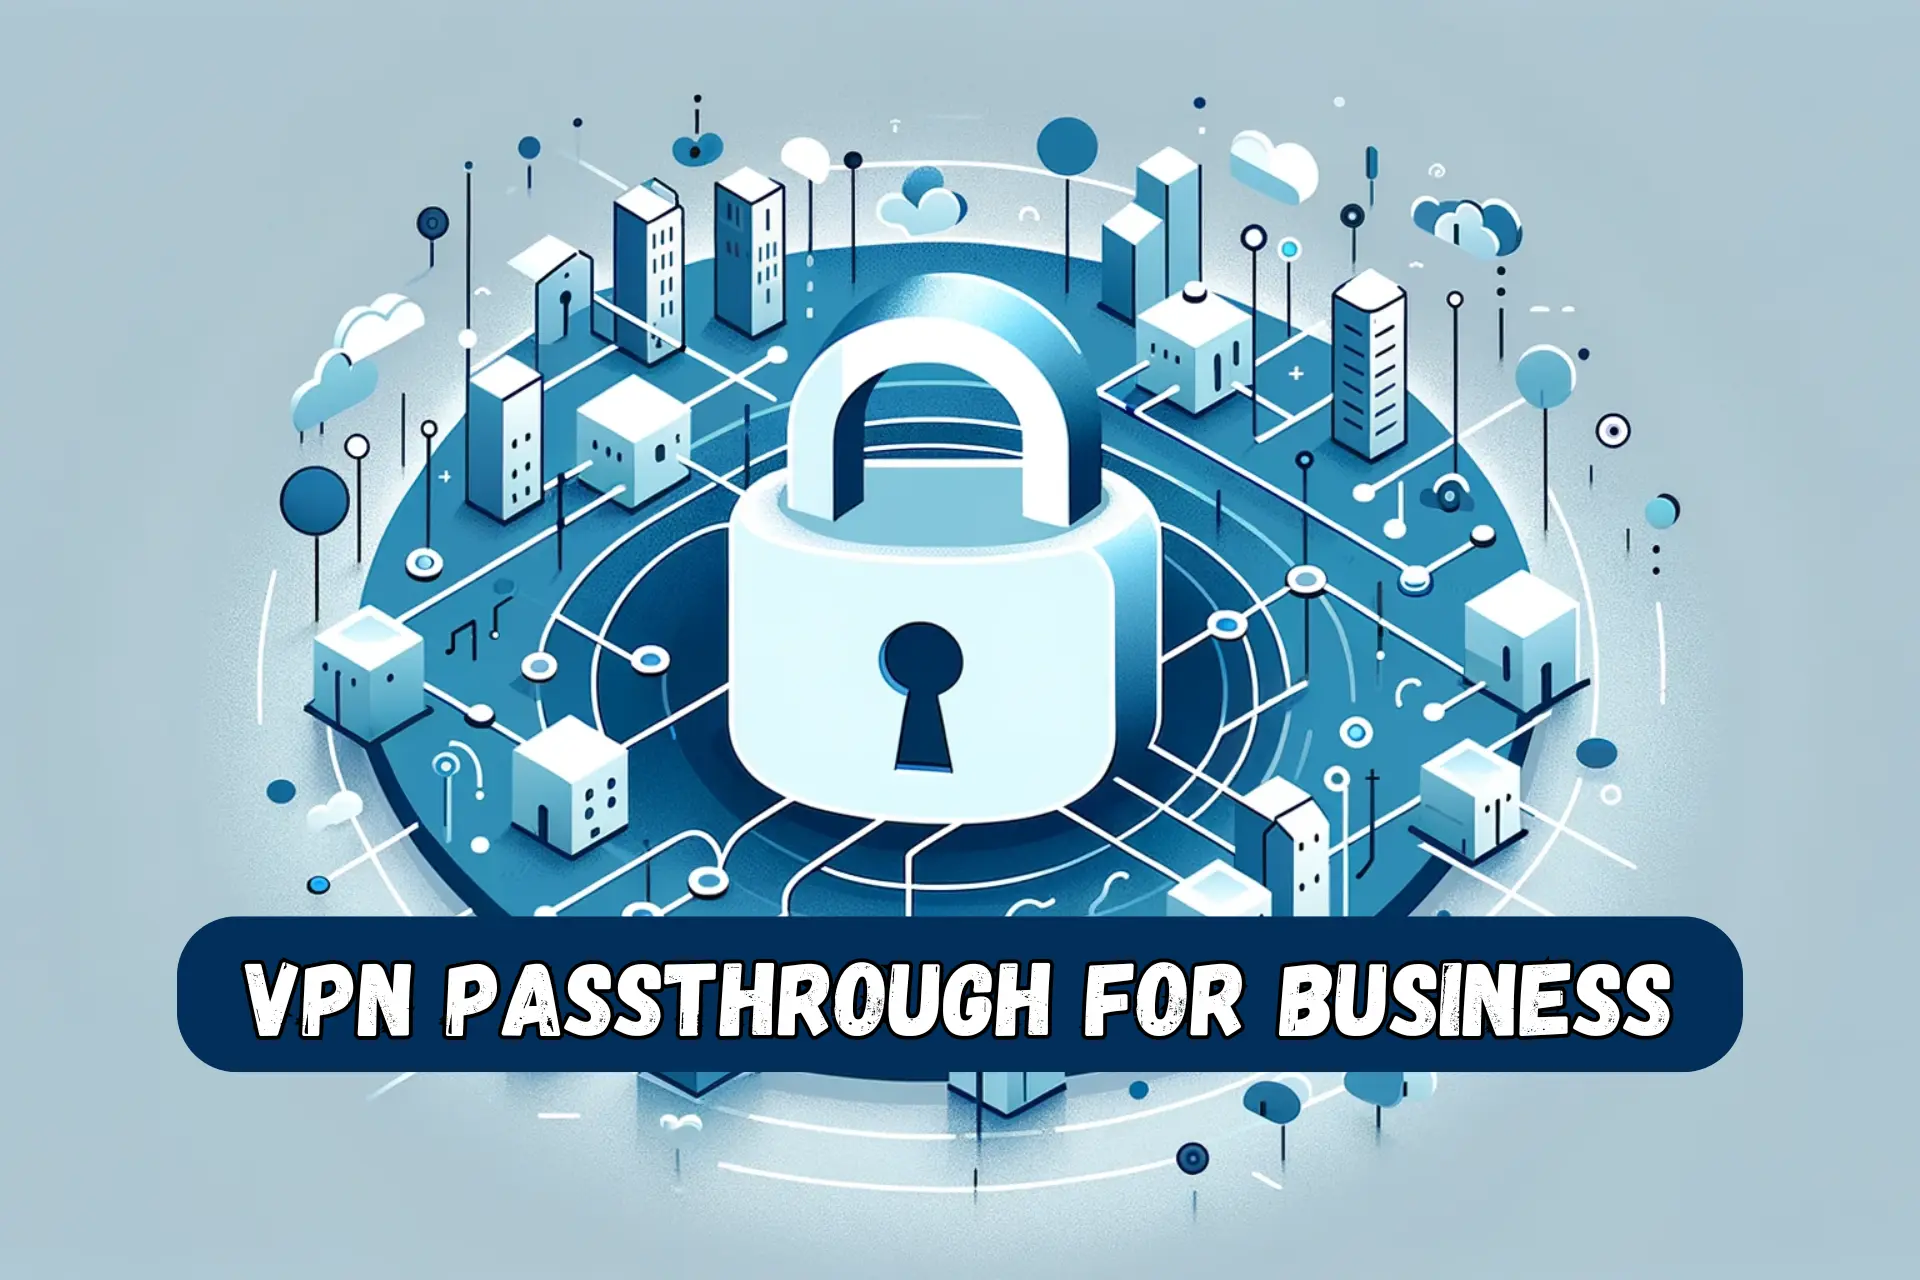 7 Benefits of VPN Passthrough in Your Business